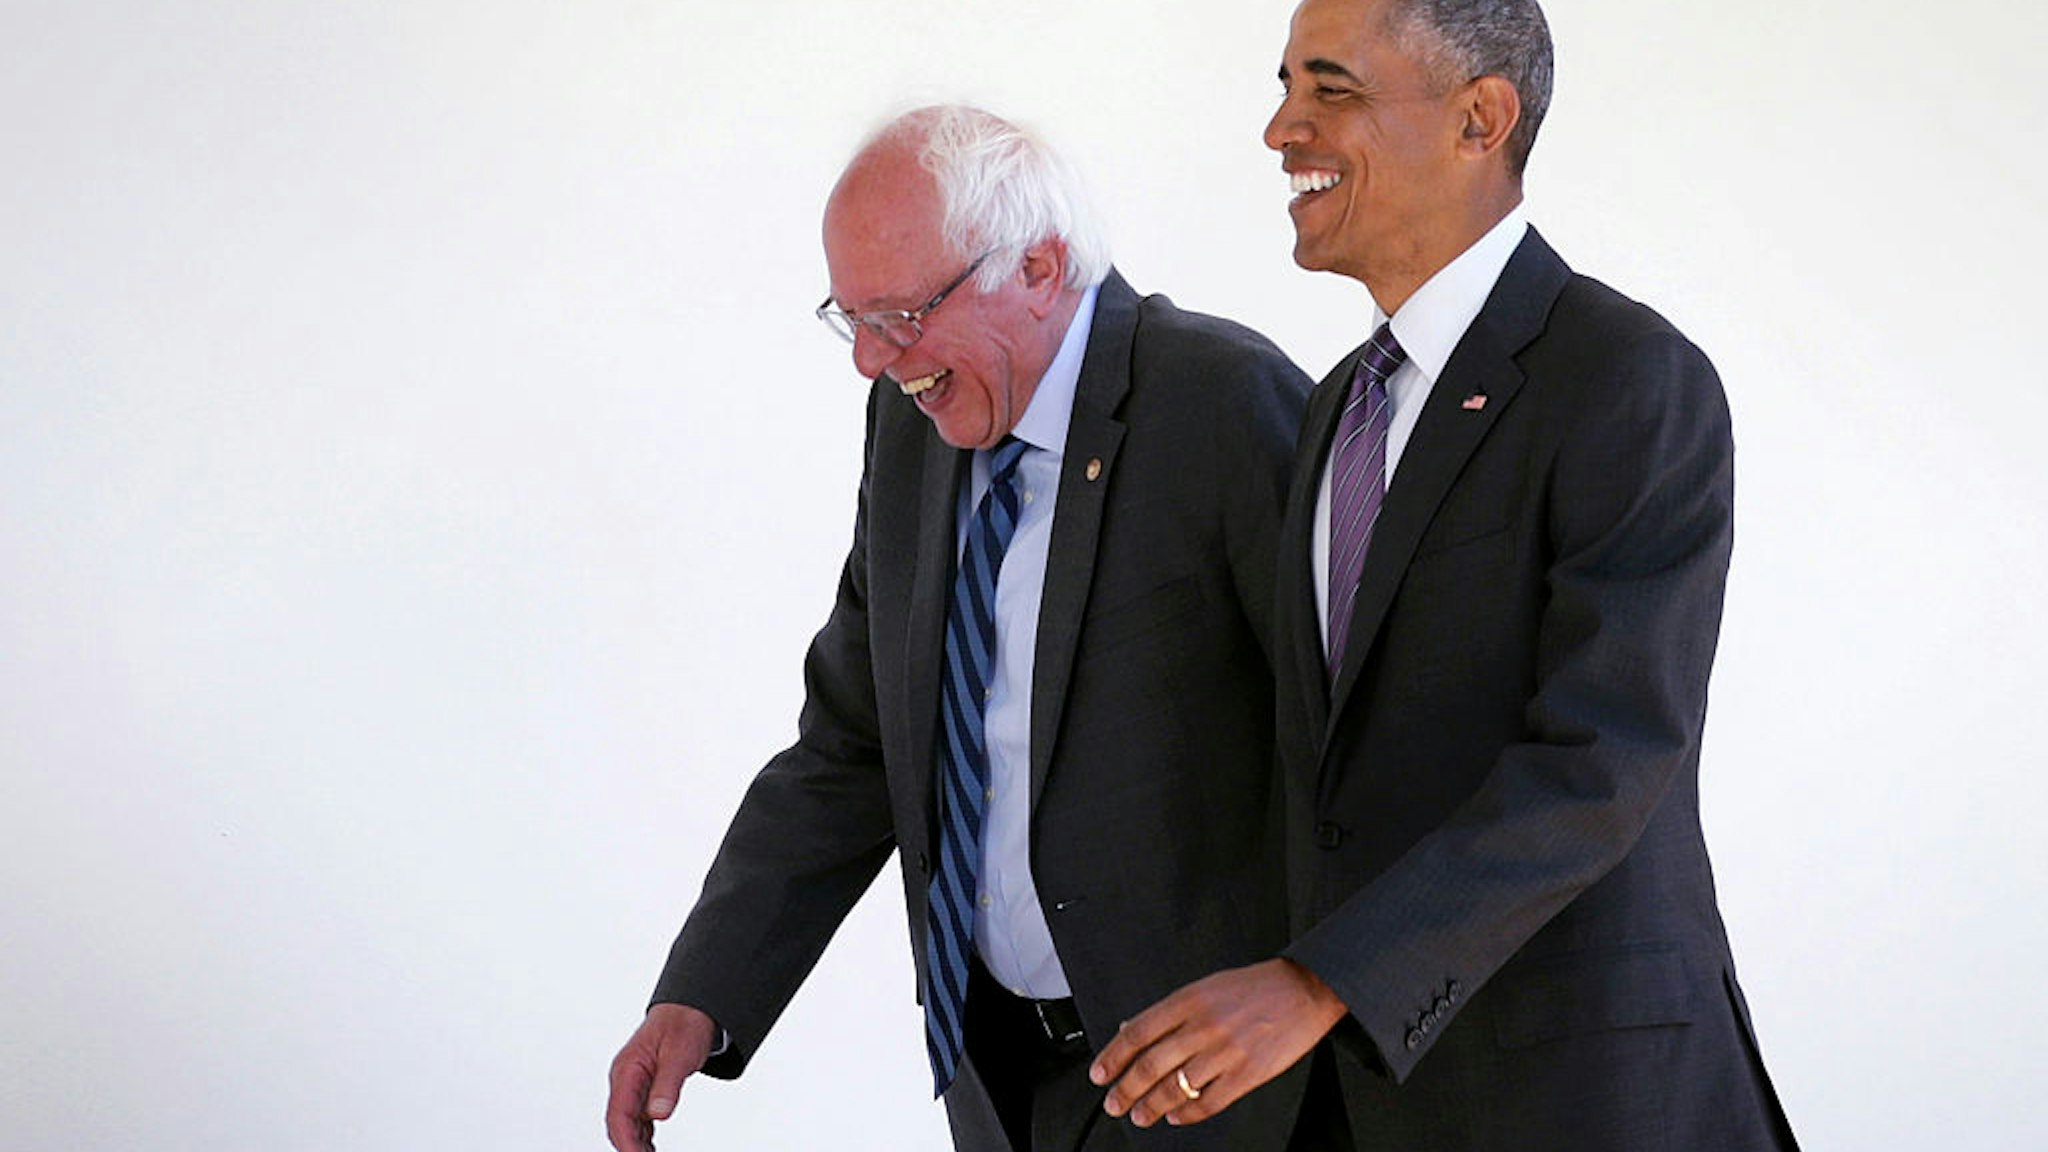 Democratic presidential candidate Sen. Bernie Sanders (D-VT) (L) walks with President Barack Obama (R) through the Colonnade as he arrives at the White House for an Oval Office meeting June 9, 2016 in Washington, DC.